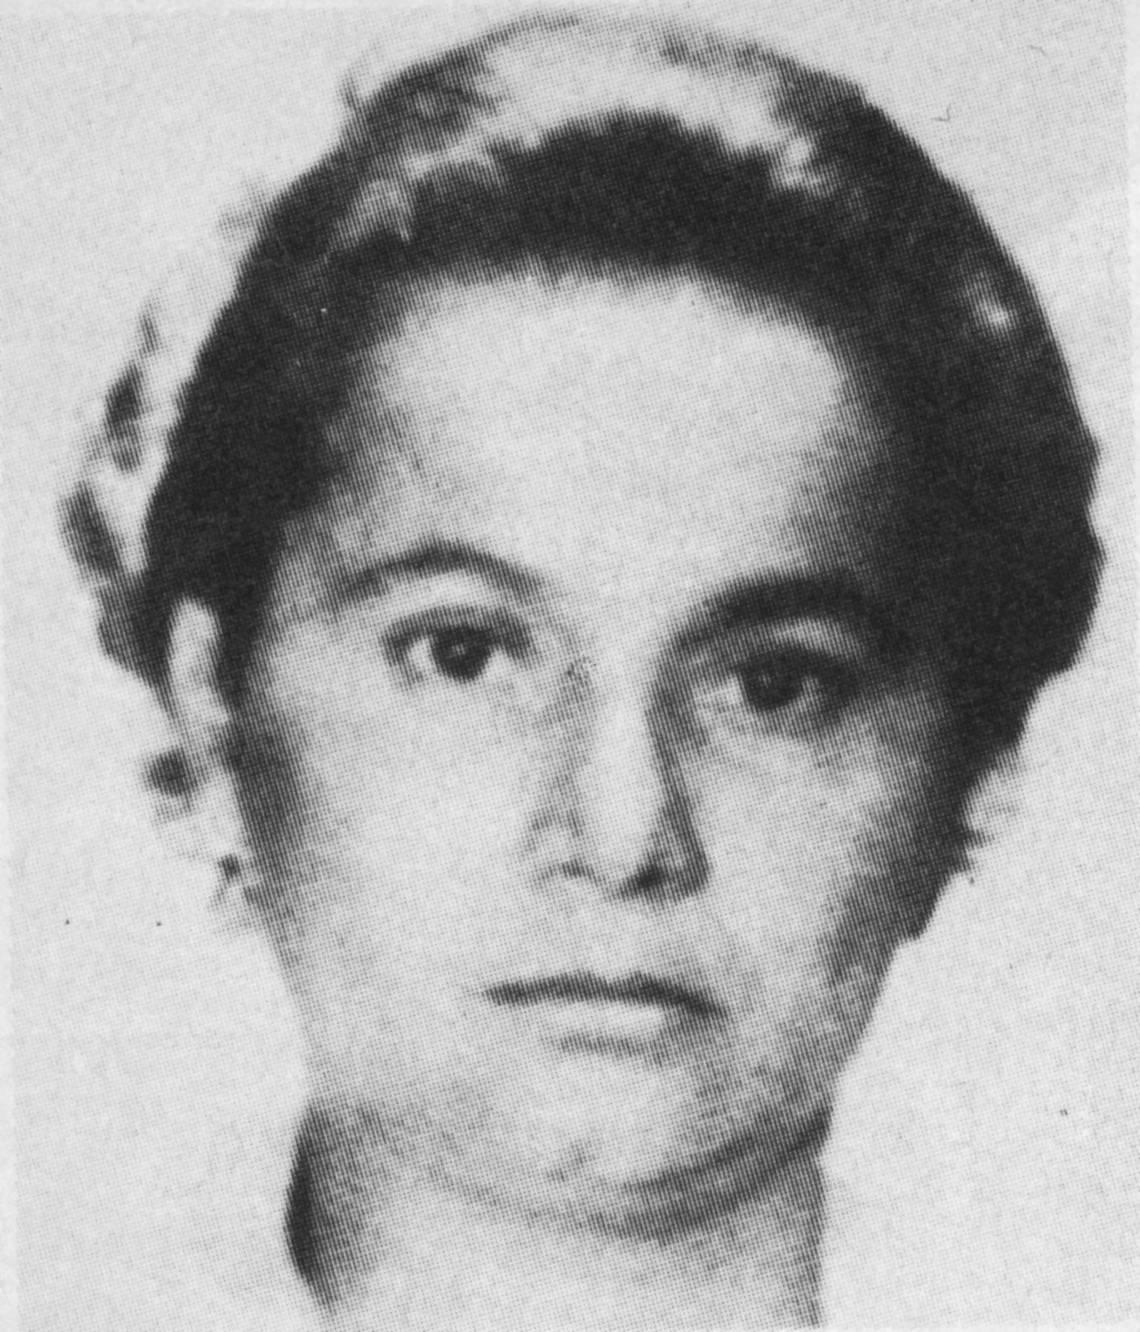 Griselda Blanco was one of Miami’s most murderous and cash-happy drug dealers of the Cocaine Cowboys era.